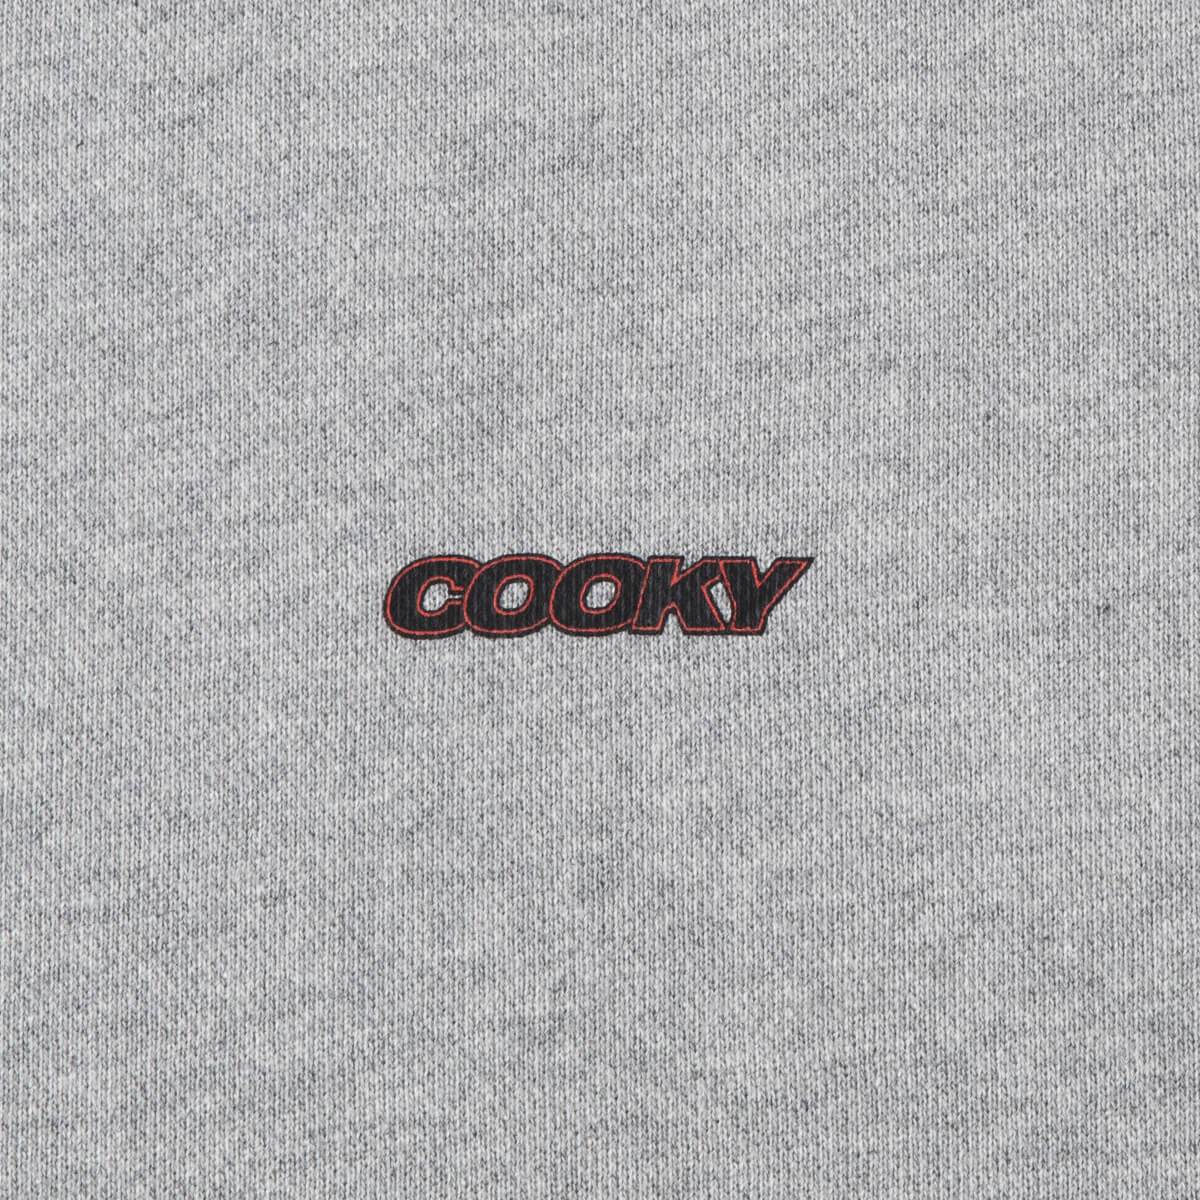 BT21 COOKY Space Squad MTM Sweater Gray